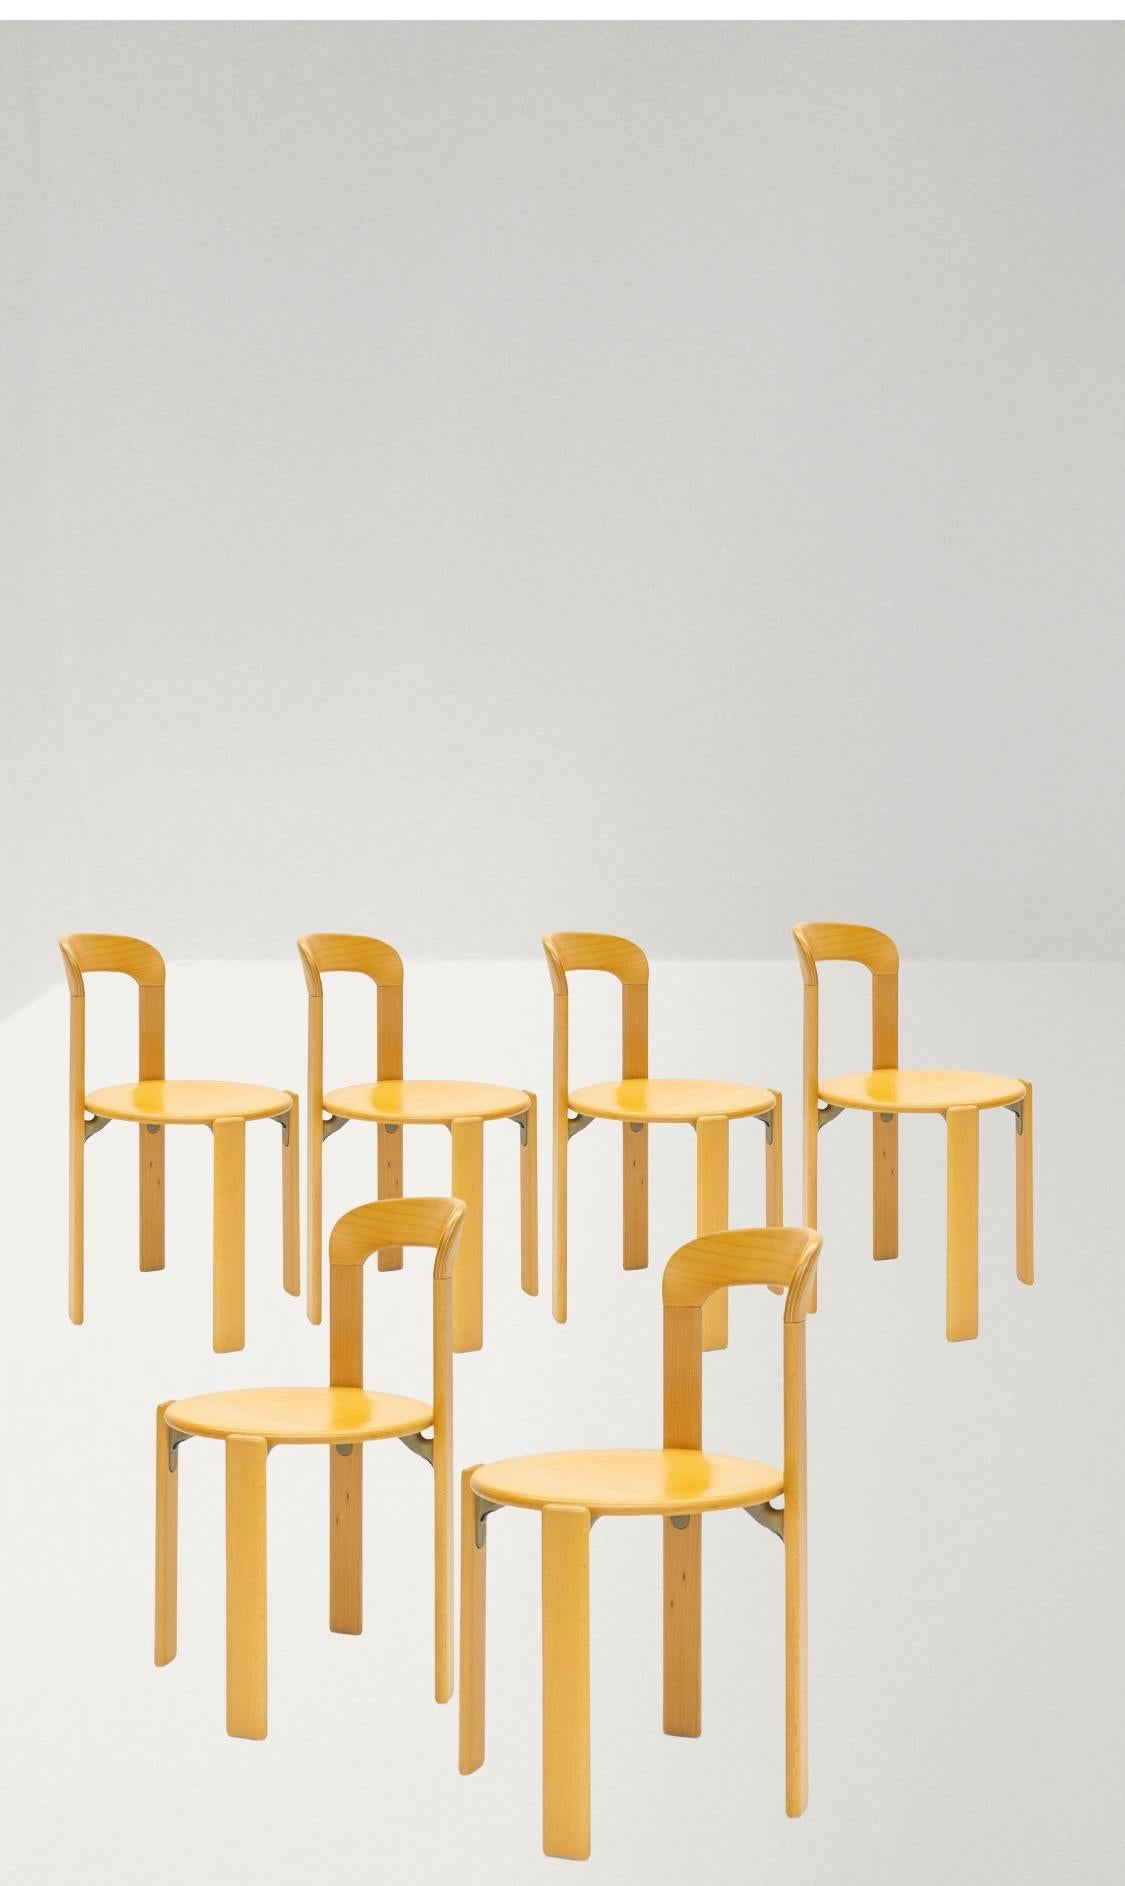 Contemporary Mid-Century Modern, 6 Rey Chairs by Bruno Rey, Color Vintage Beech, Design 1971